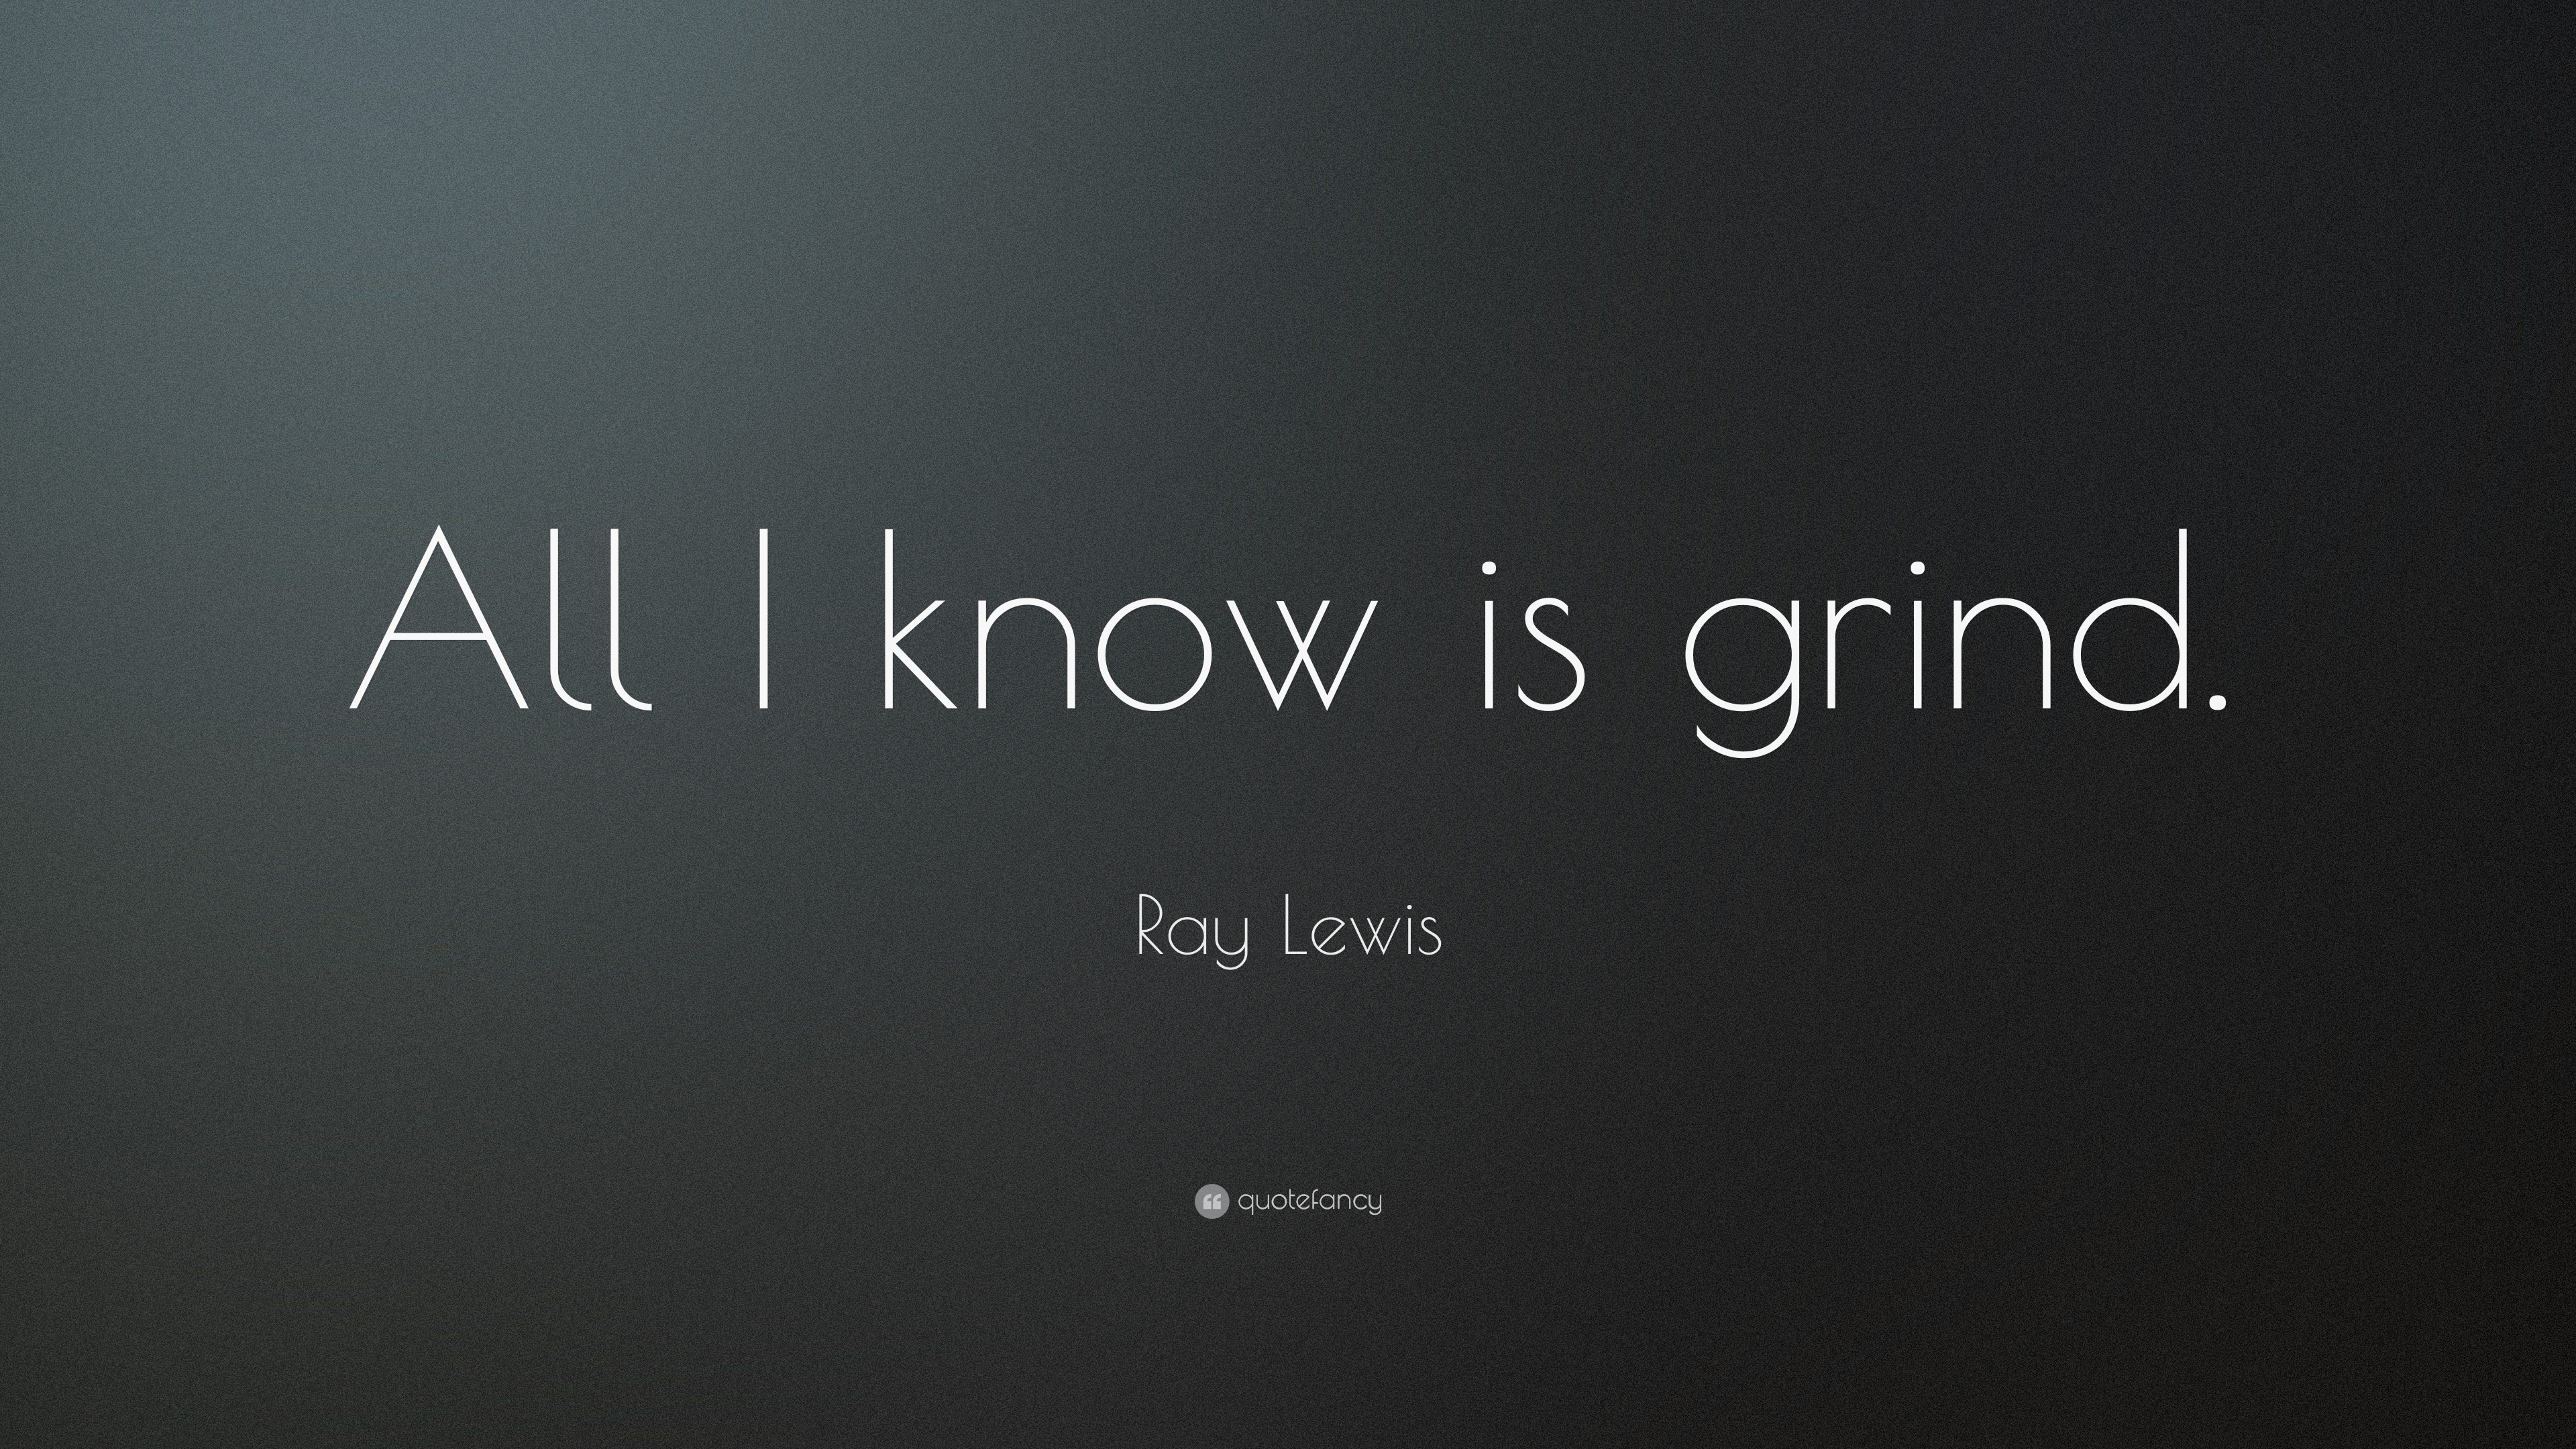 Ray Lewis Quote: “All I know is grind.” (4 wallpapers) - Quotefancy